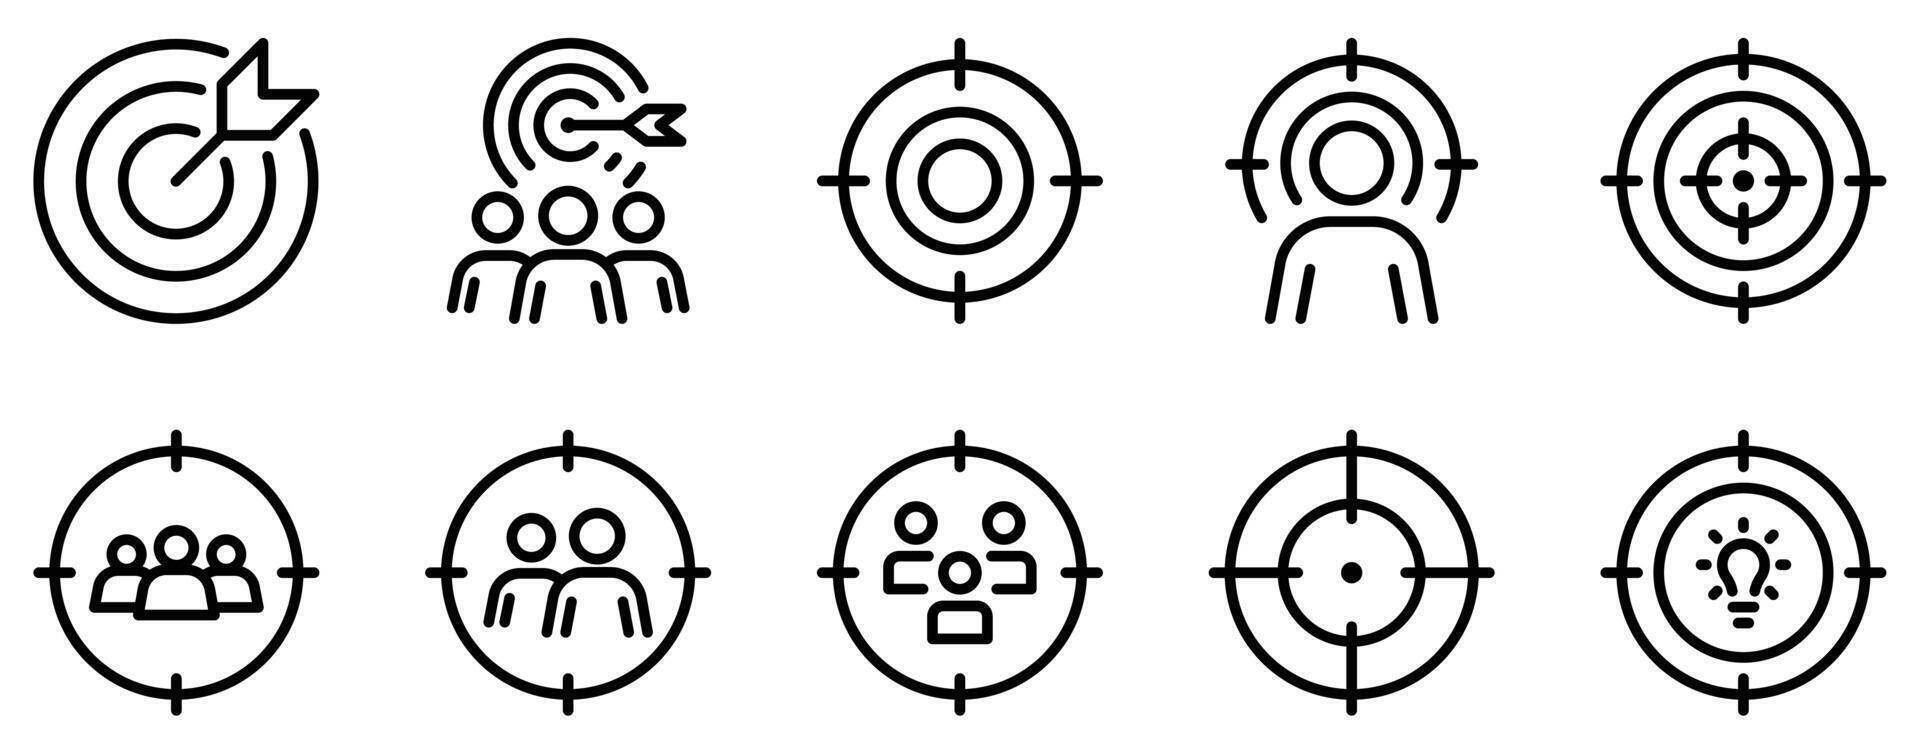 data gathering icon line style set collection vector